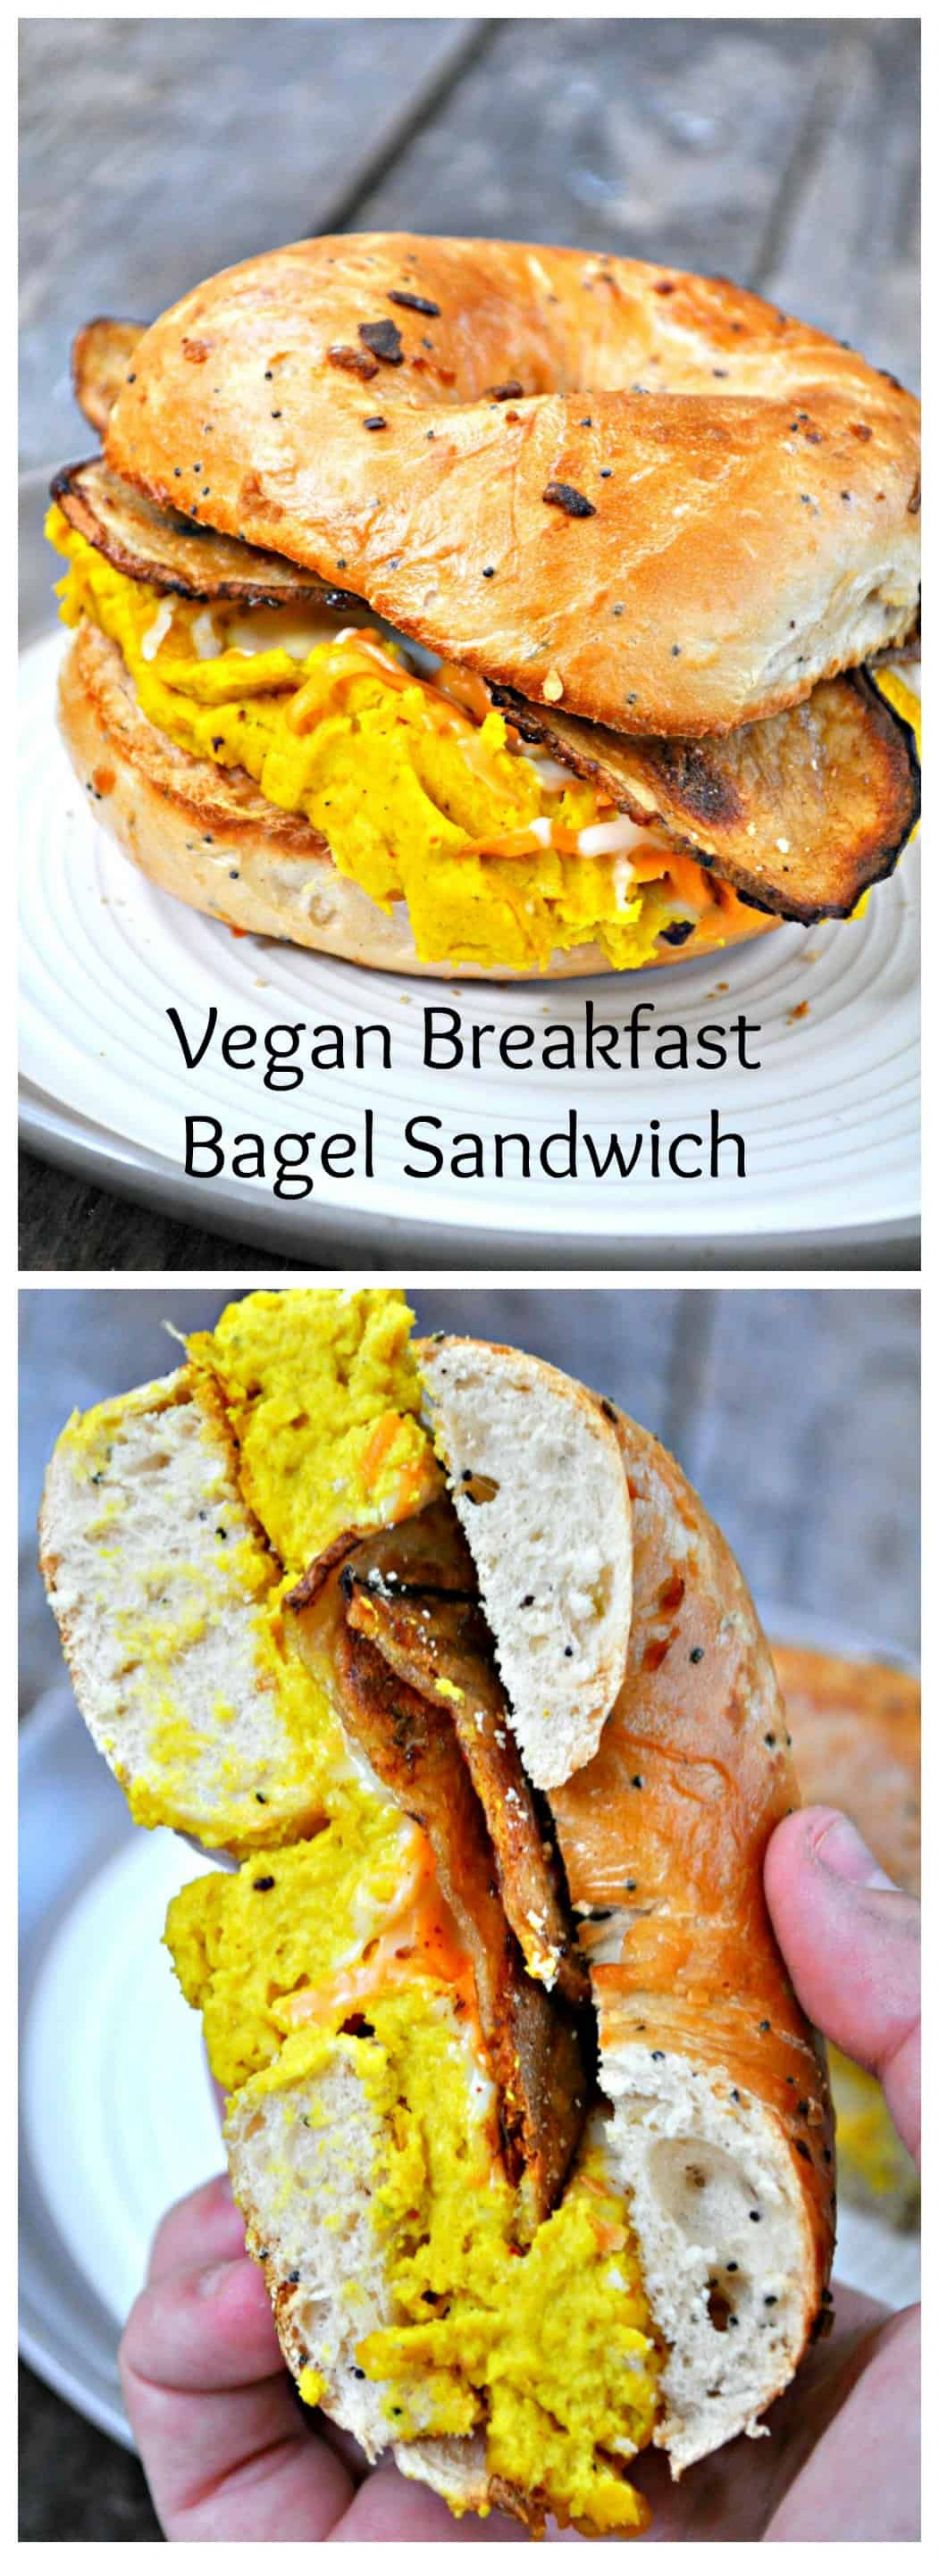 Vegan Breakfast Bagel
 Vegan Breakfast Bagel Sandwich Rabbit and Wolves